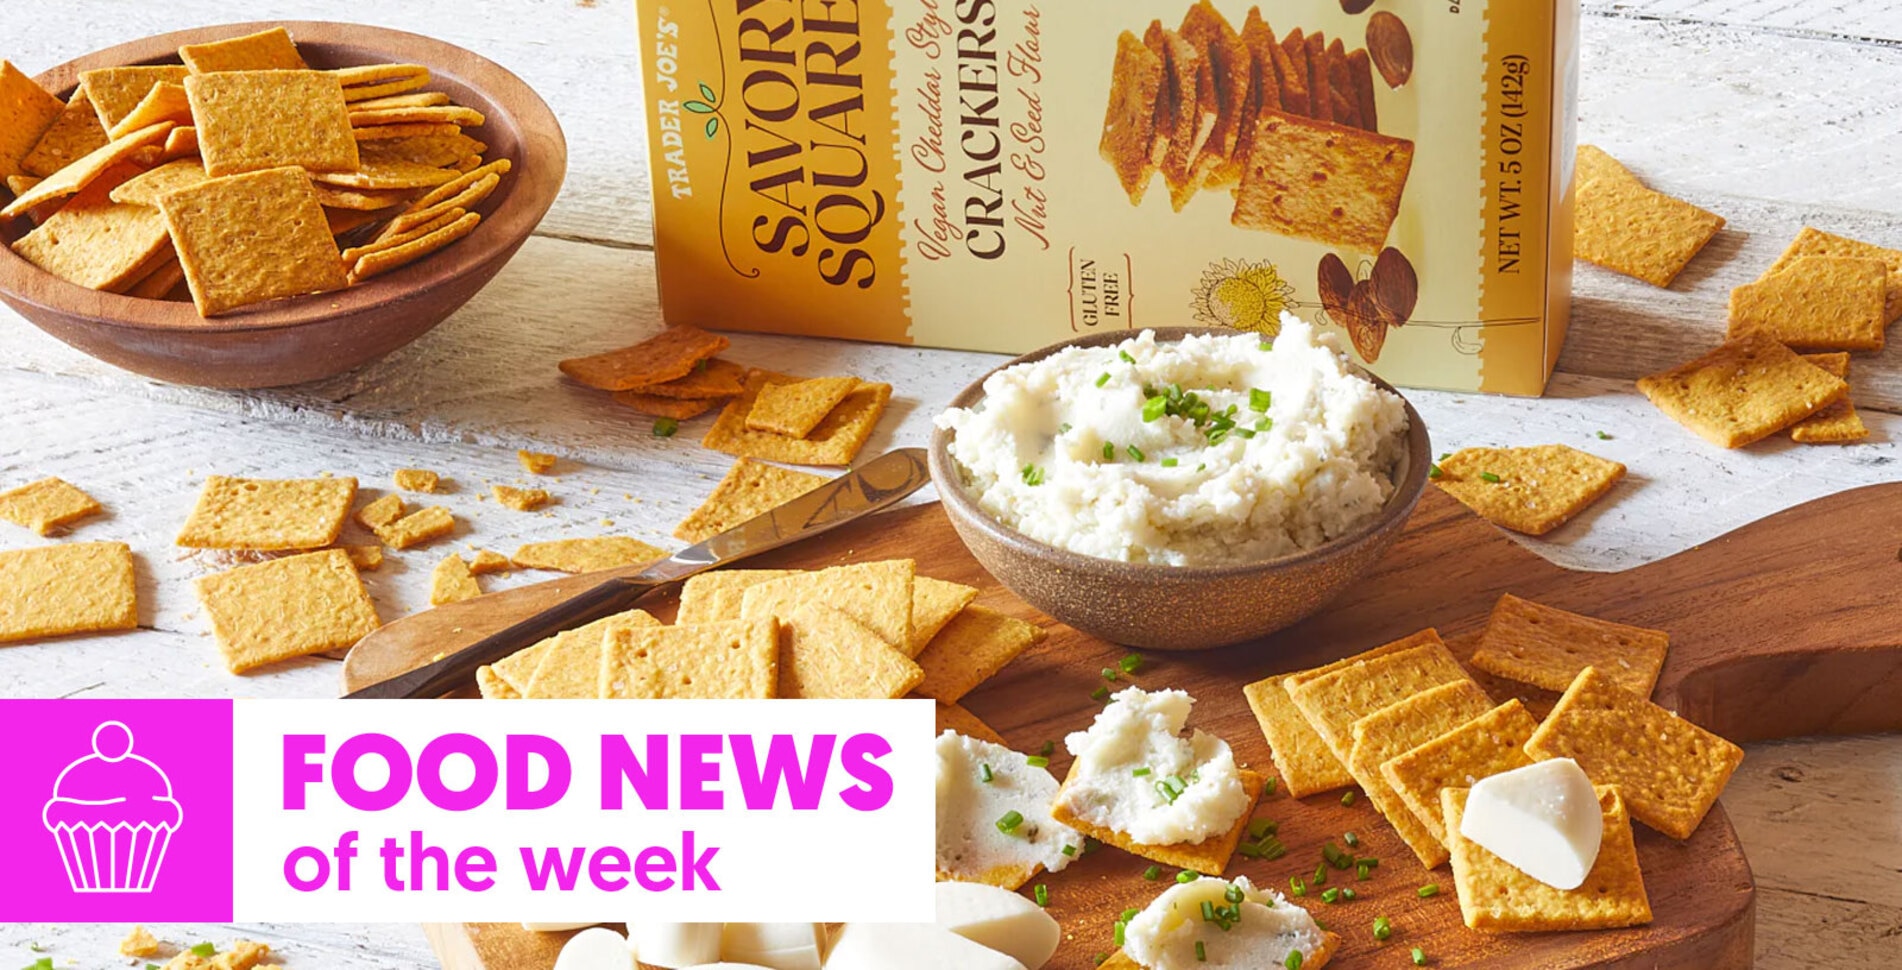 Vegan Food News of the Week: Coors Field's Meatless Burgers, Trader Joe's "Cheez-Its," and Jim Beam's Kentucky Coolers